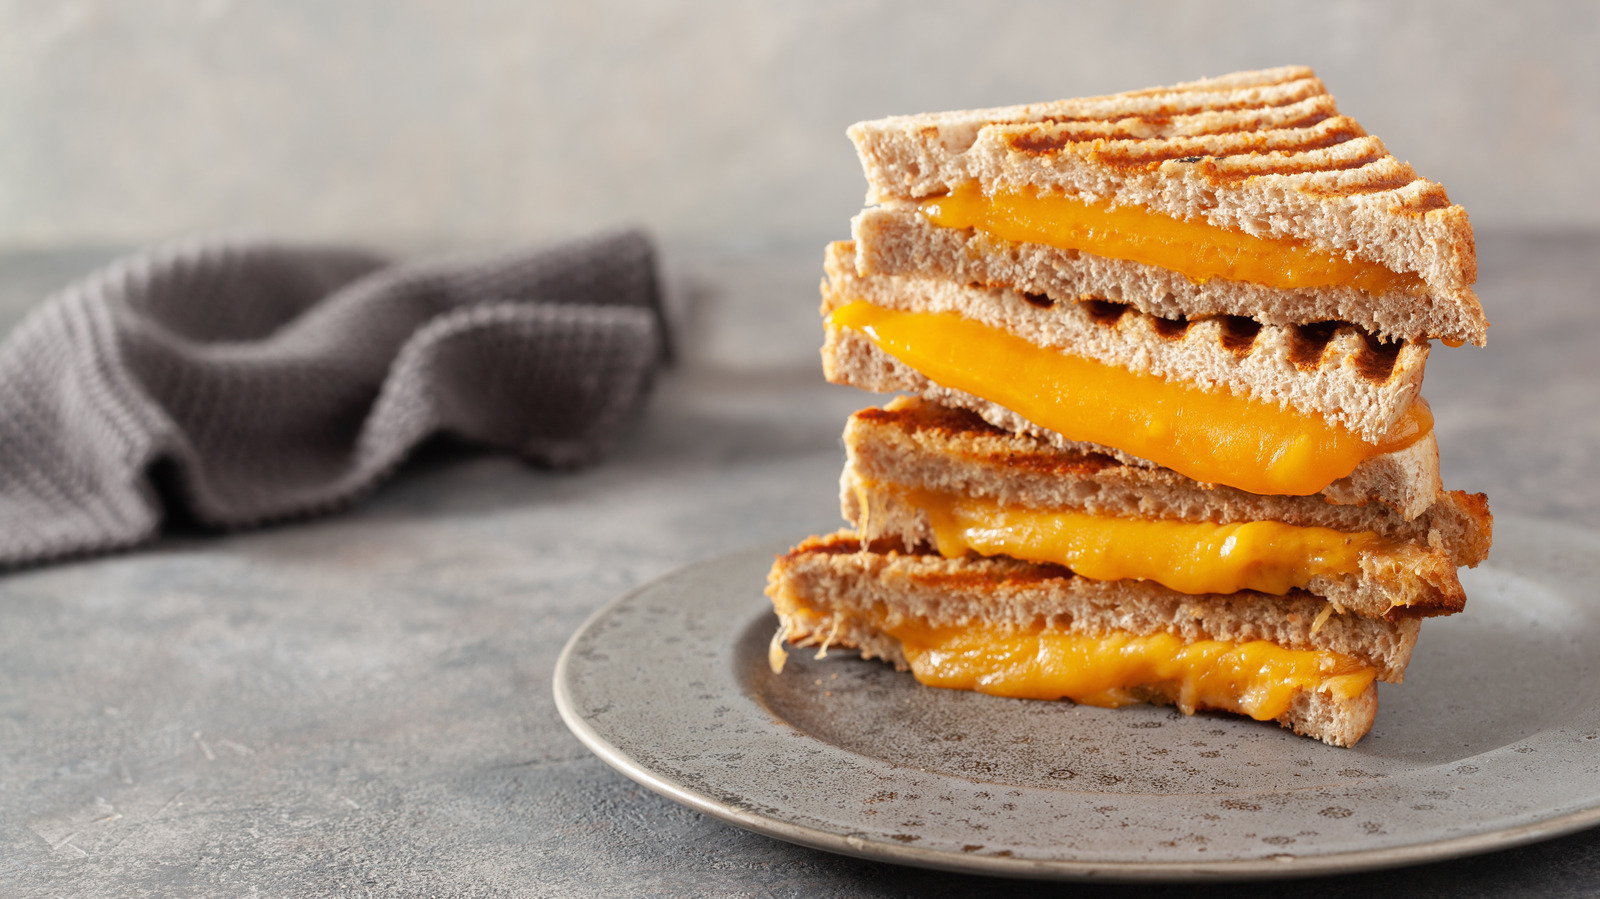 The Secret Canned Ingredient for an Extra Creamy Grilled Cheese Enhancement